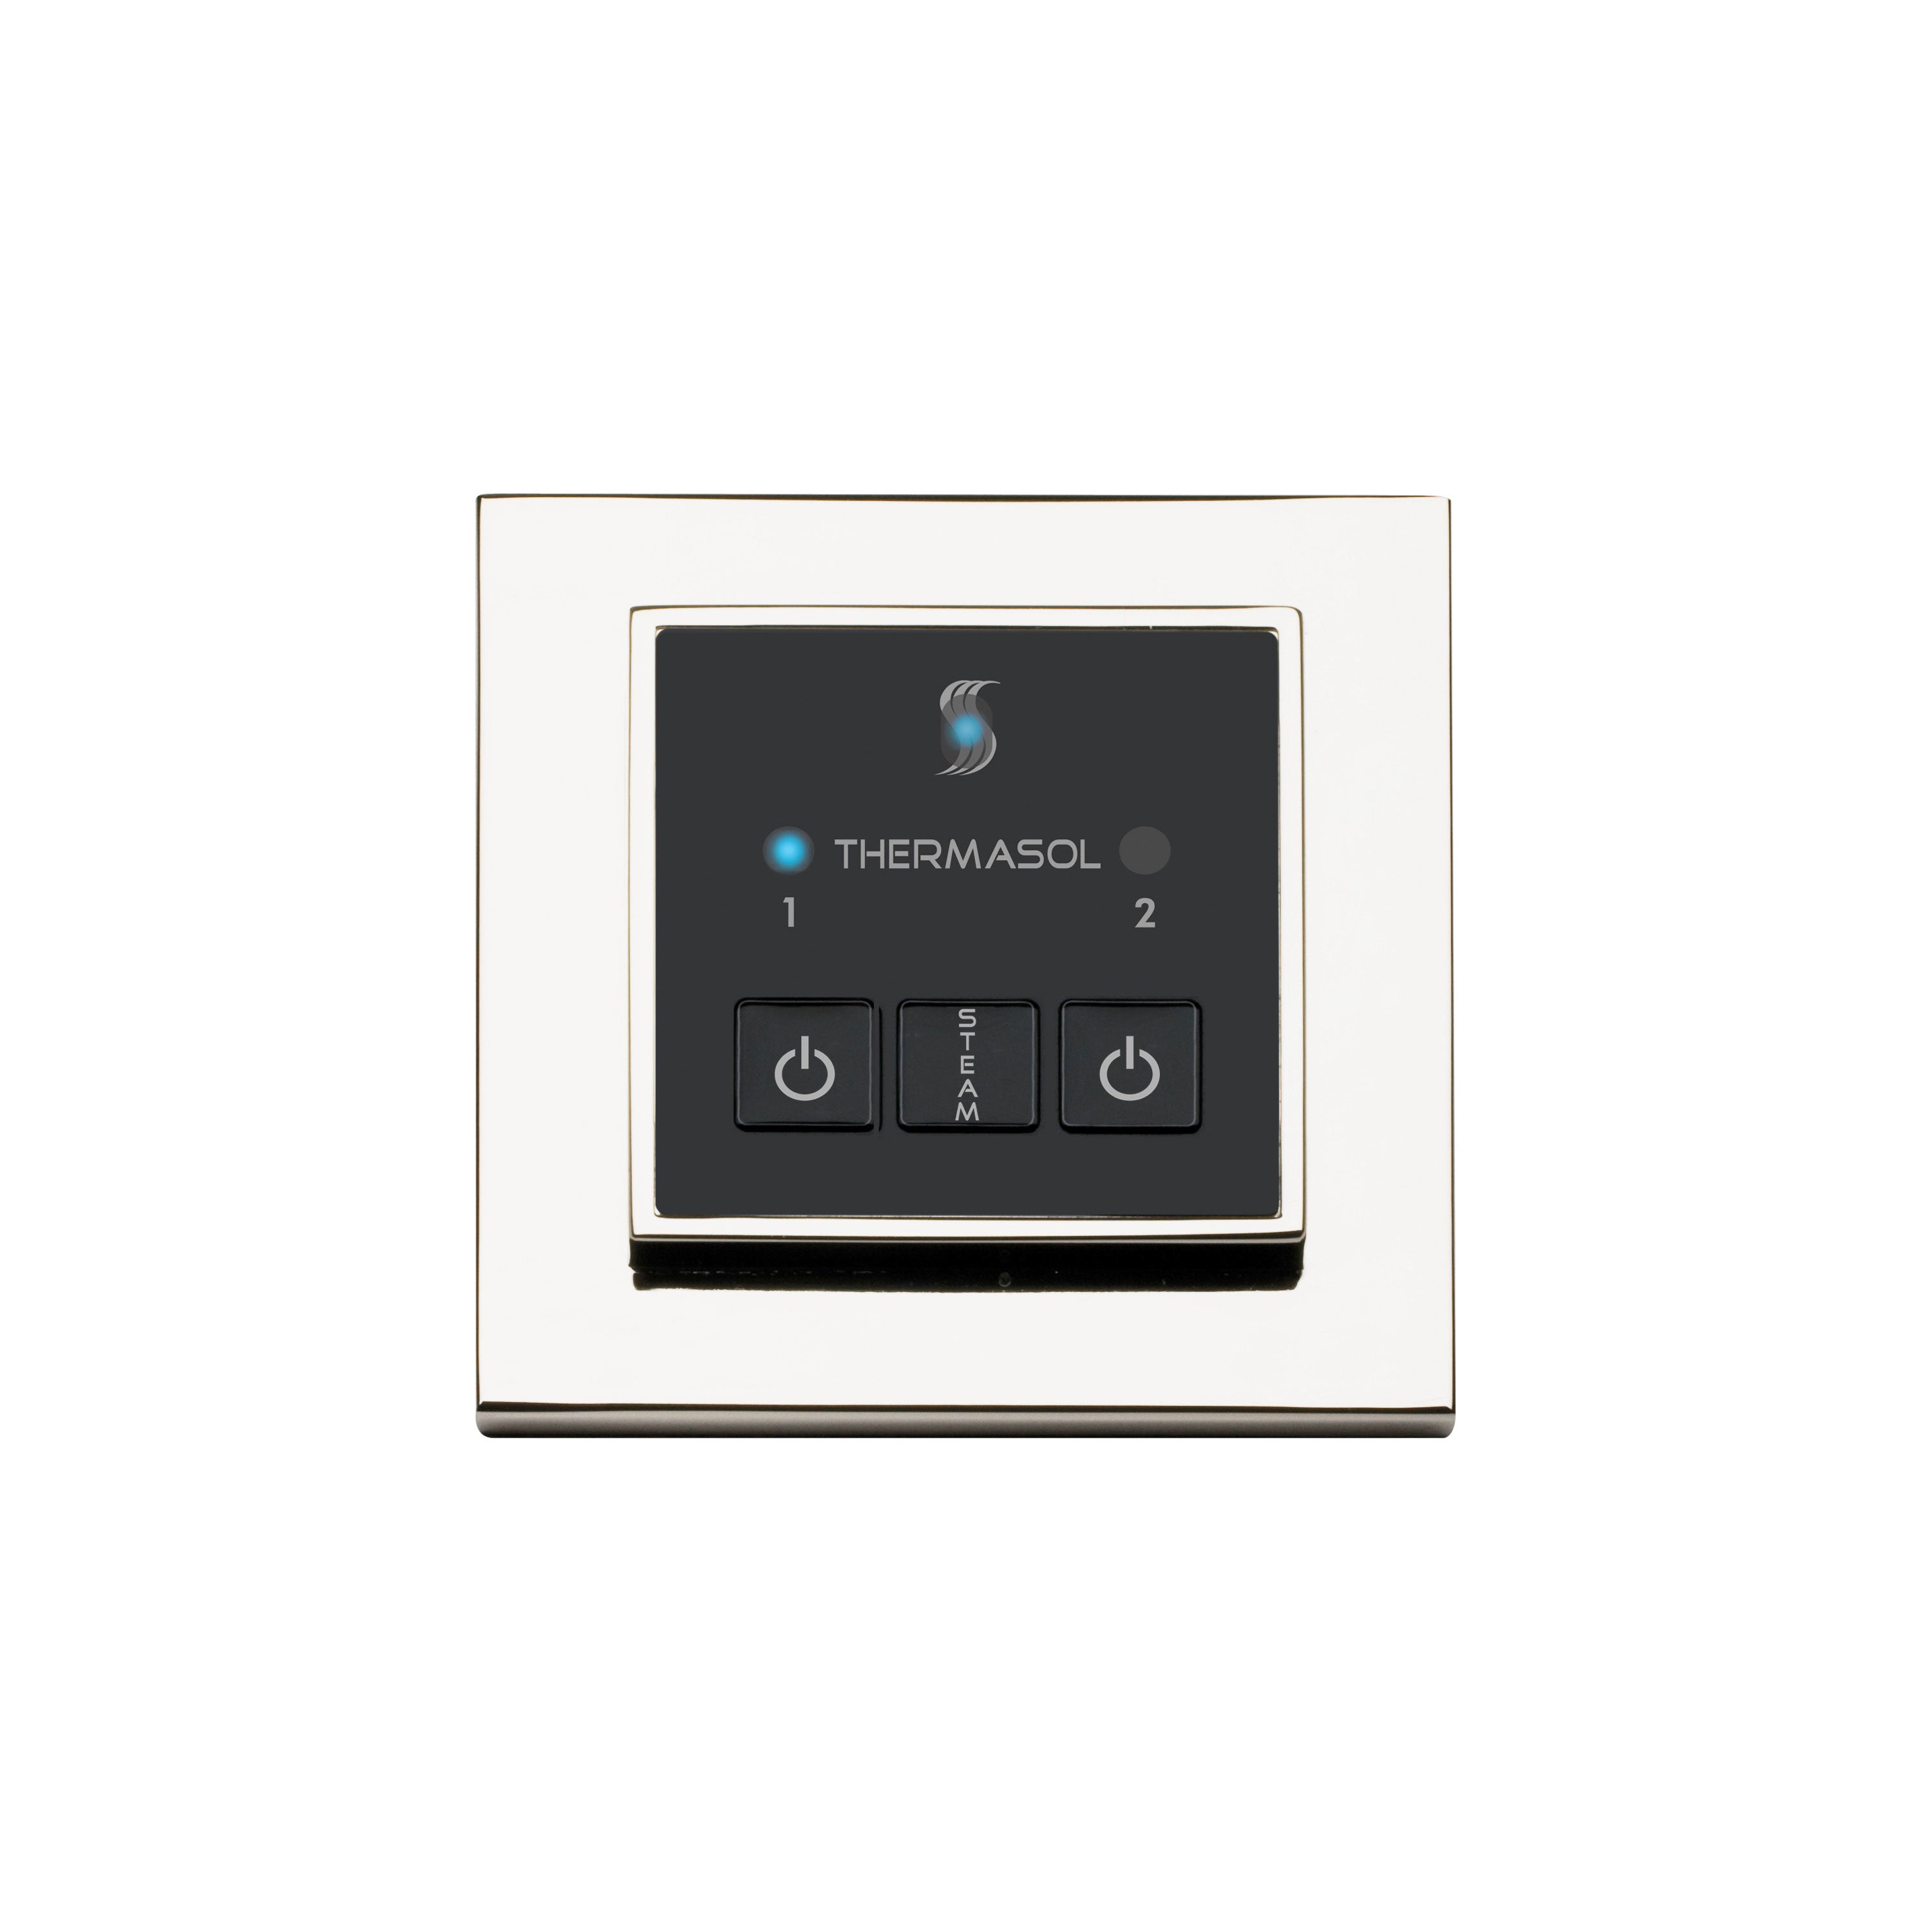 ThermaSol Steam Shower Control Unit - Easy Start Control Square